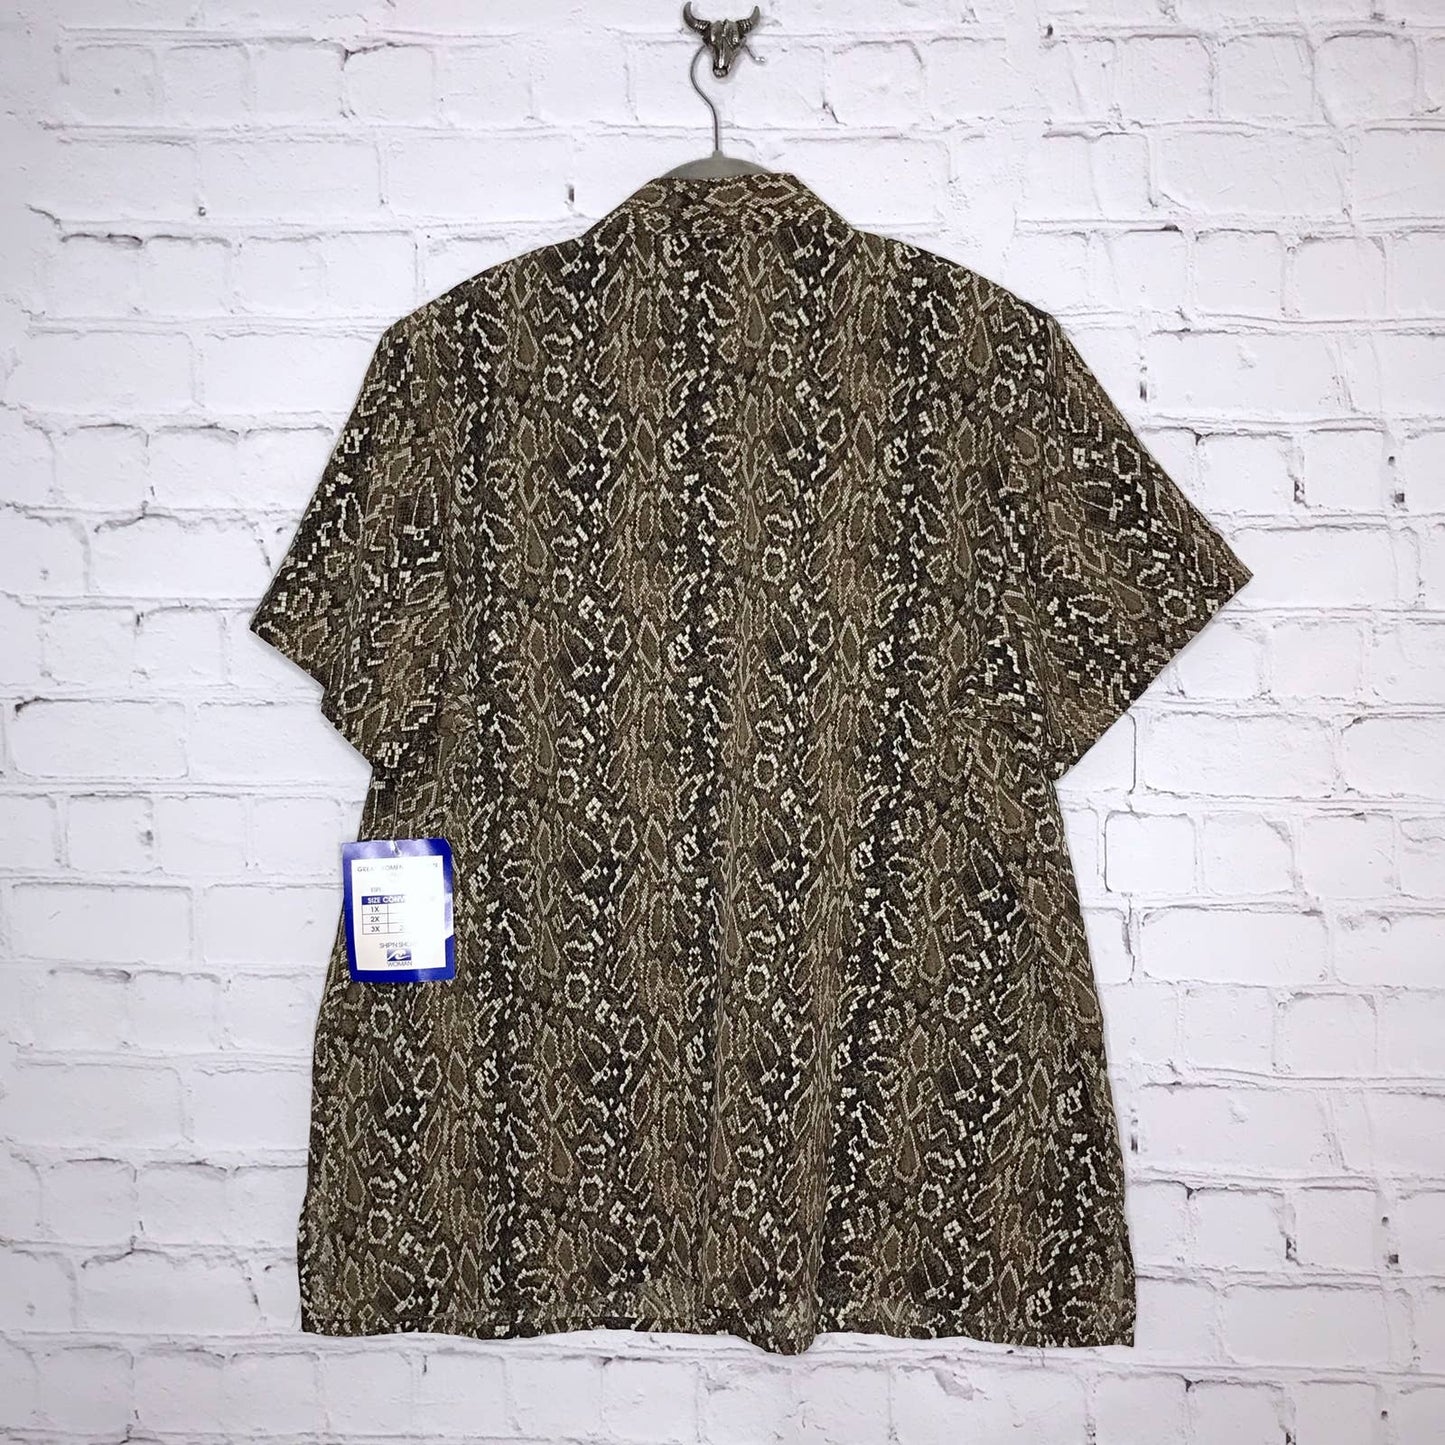 Vintage 90s Snake Print Button Down Blouse Short Sleeves Ship n' Shore NWT